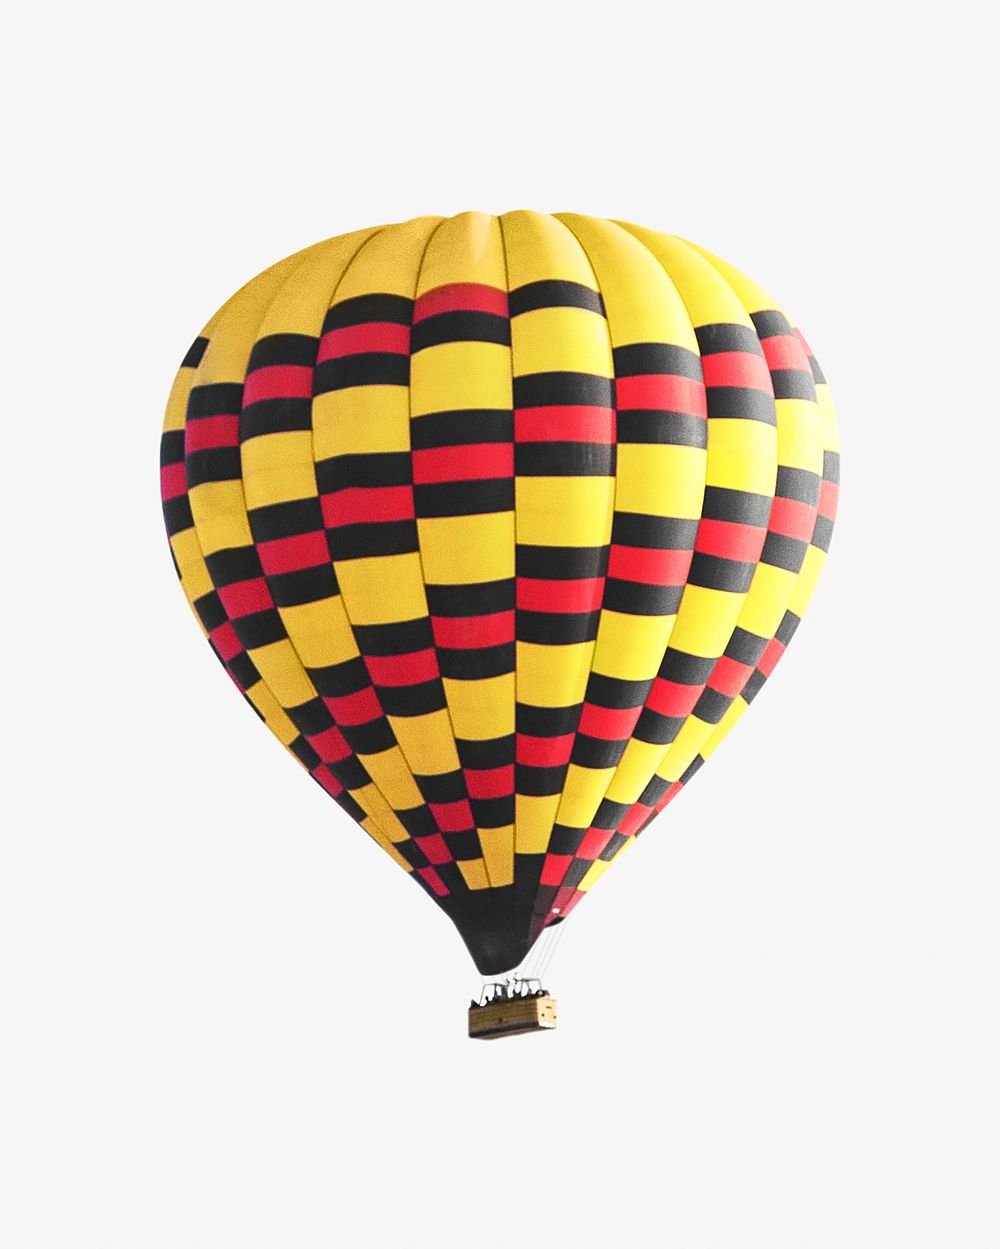 Air balloon travel isolated image on white